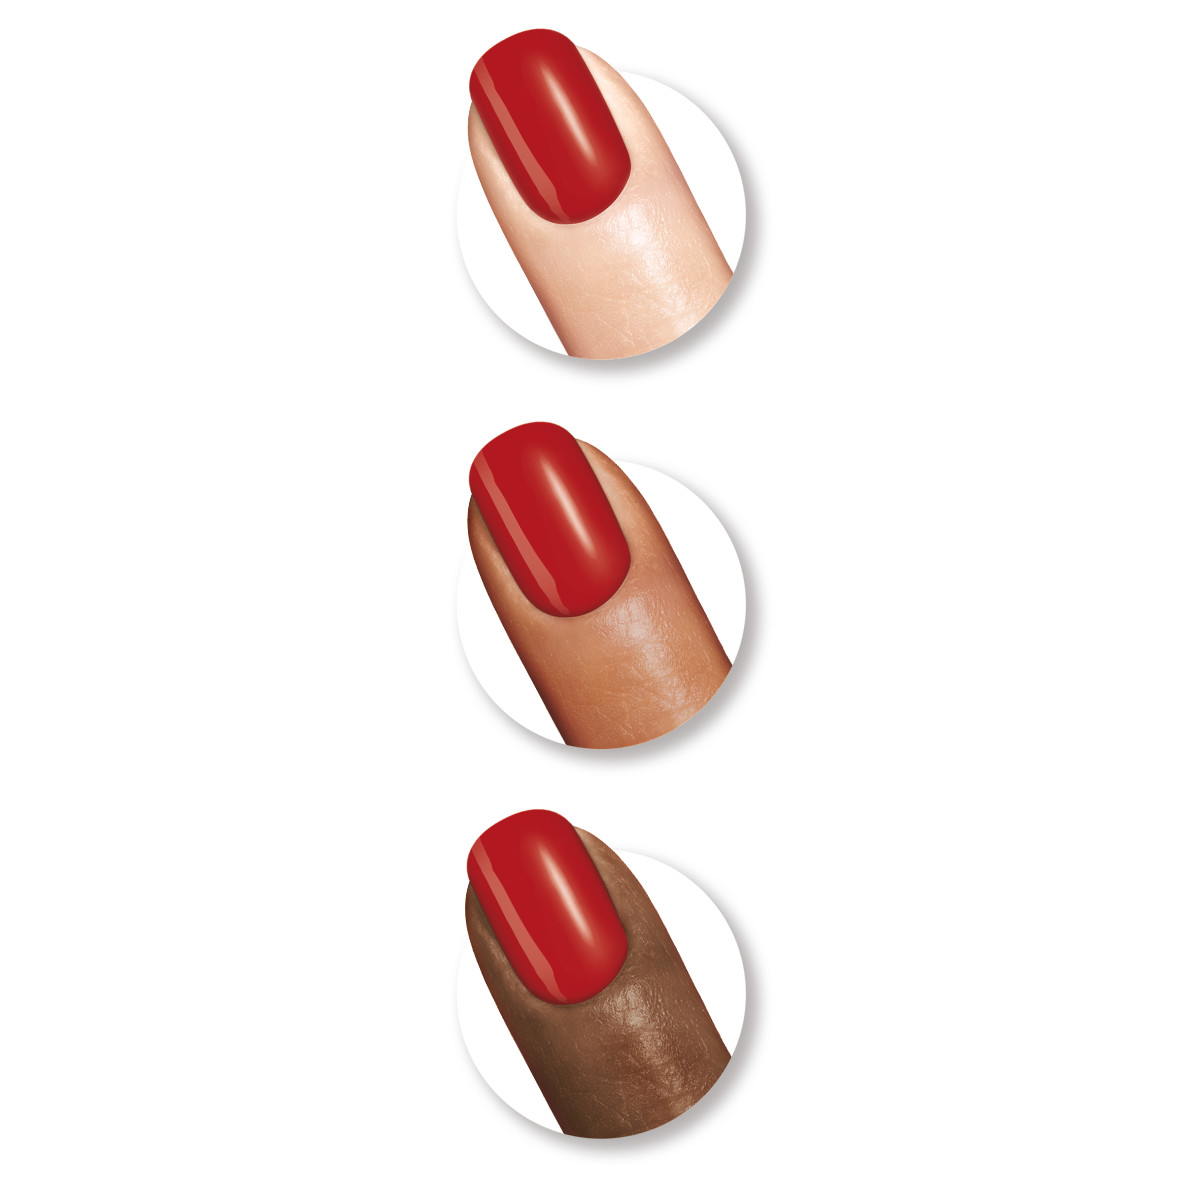 Sally Hansen Complete Salon Manicure Nail Color, Red My Lips - image 3 of 3